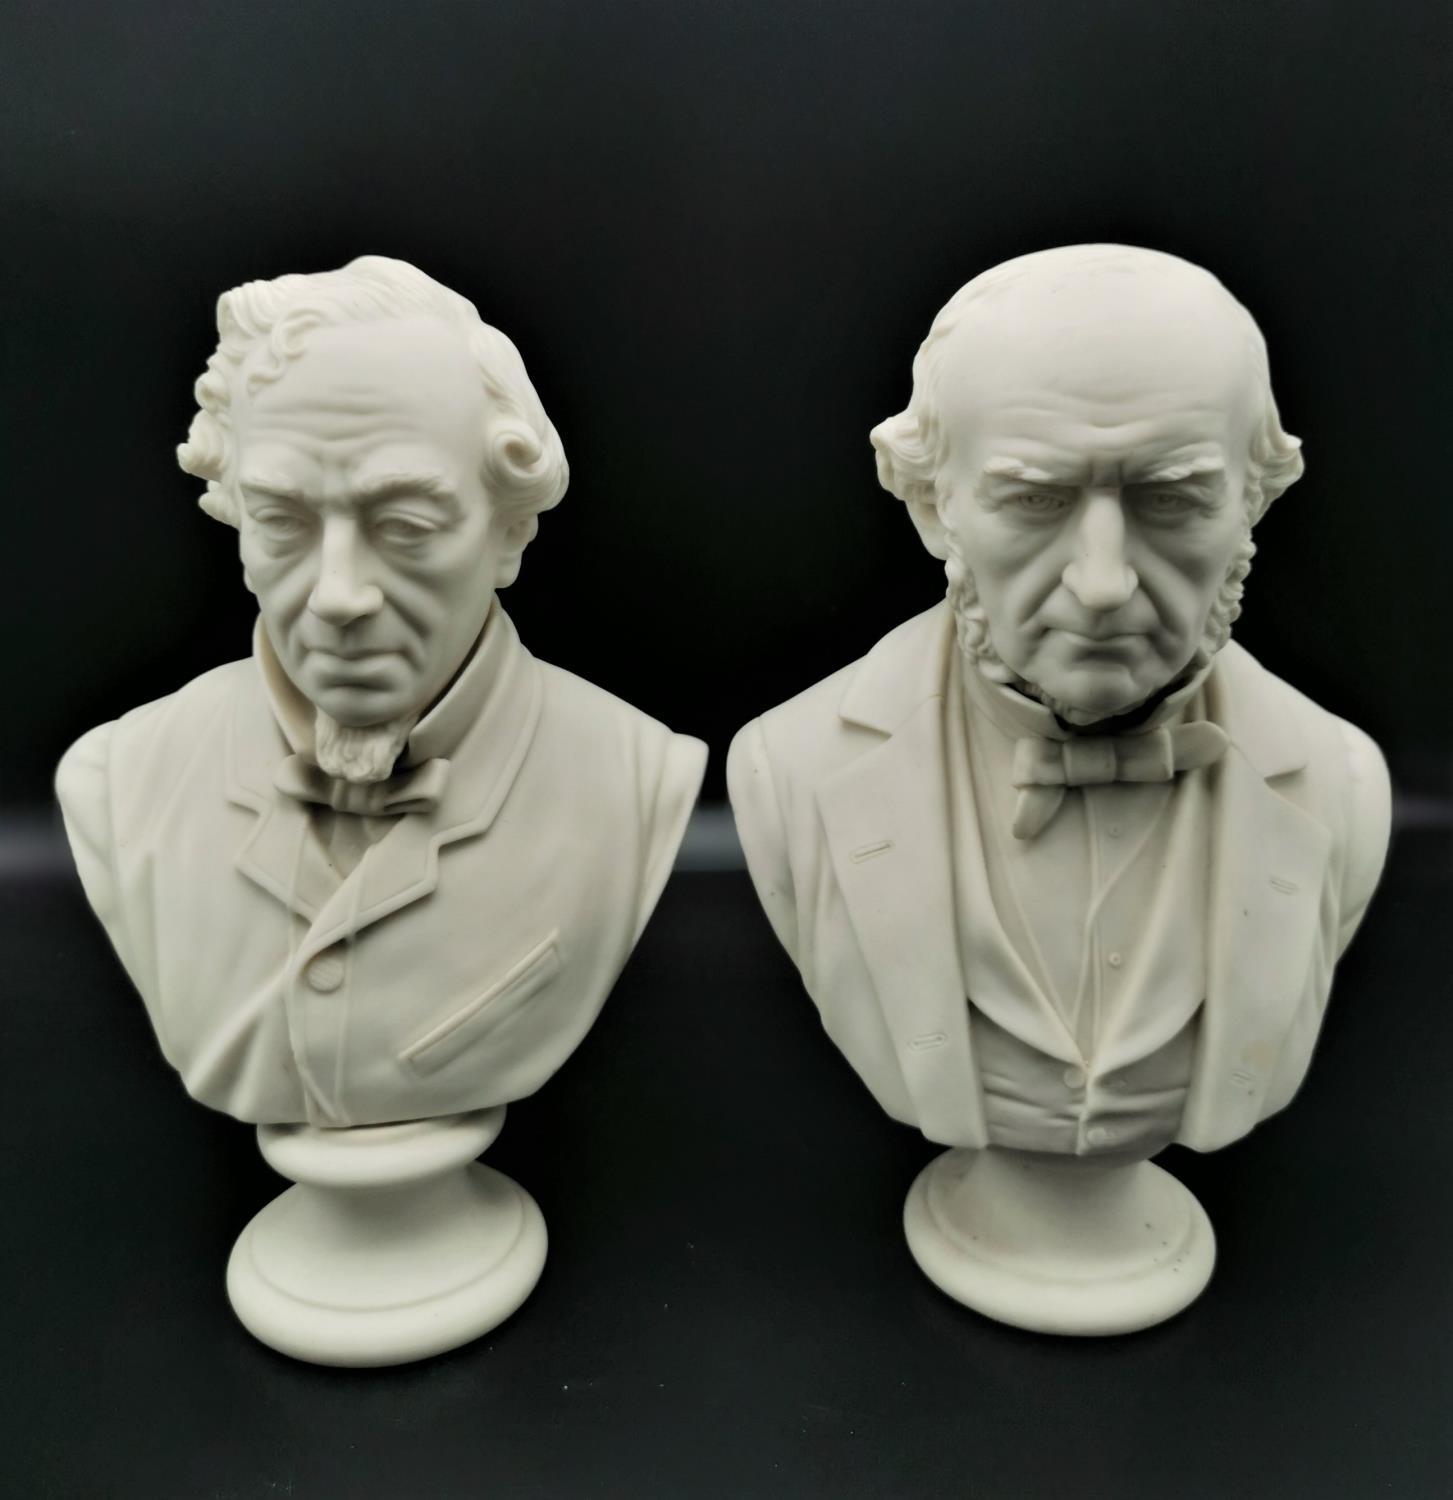 Two late 19th century parian ware busts of British Prime Ministers, to include Benjamin Disraeli, 25